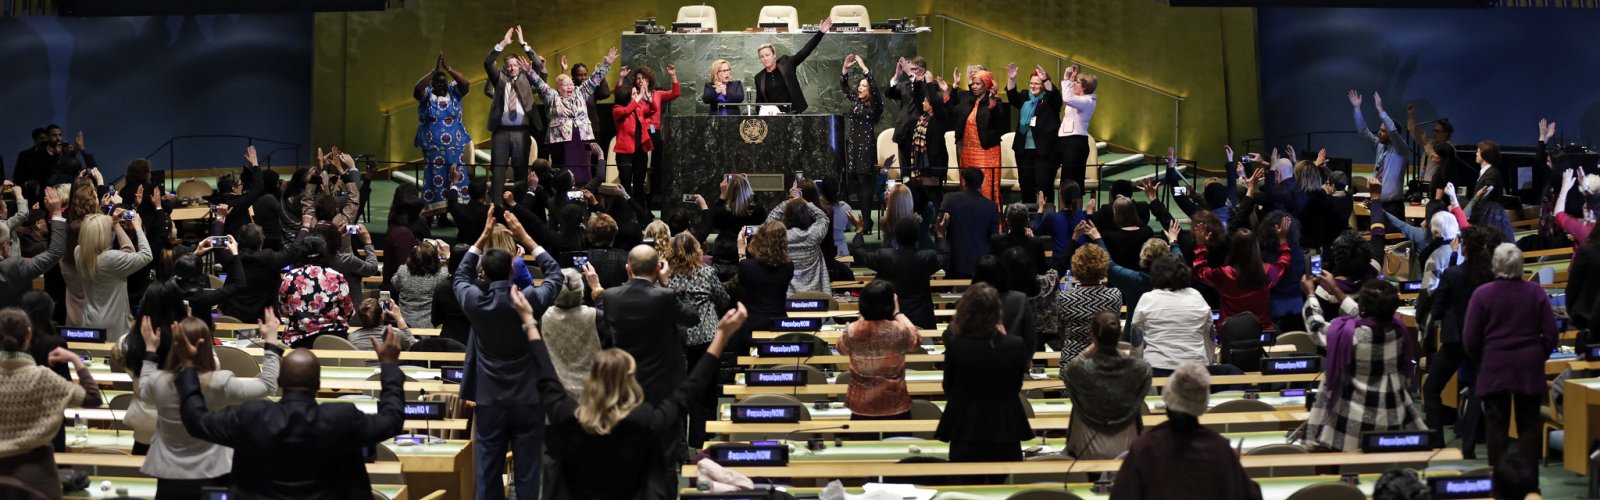 #CSW61- Launch of the Equal Pay Platform of Champions  At the UN General Assembly in New York, champions of equal pay took centre stage, putting forth a clarion call to end the global gender pay gap that stands at 23 per cent. 